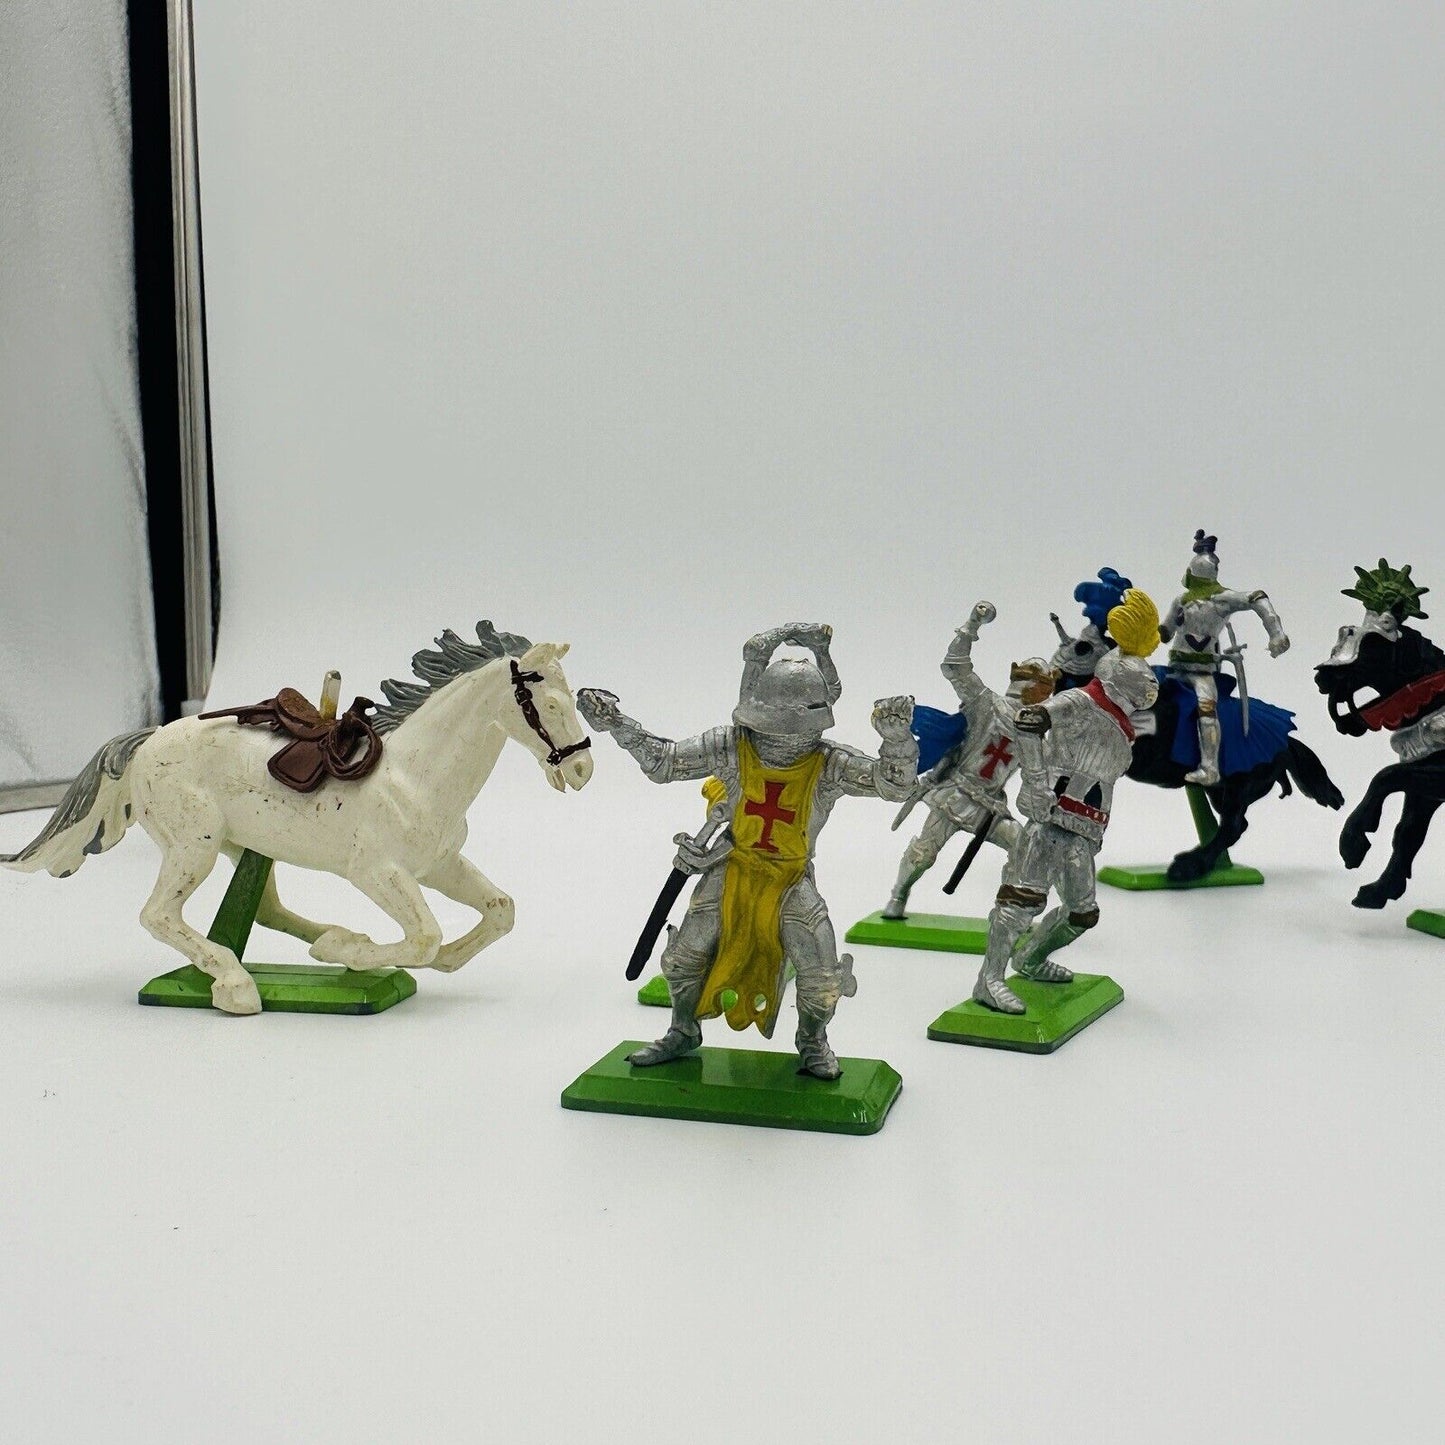 britains ltd 1971 soldiers knights Medieval Figurines Lot 9 Pieces England Made